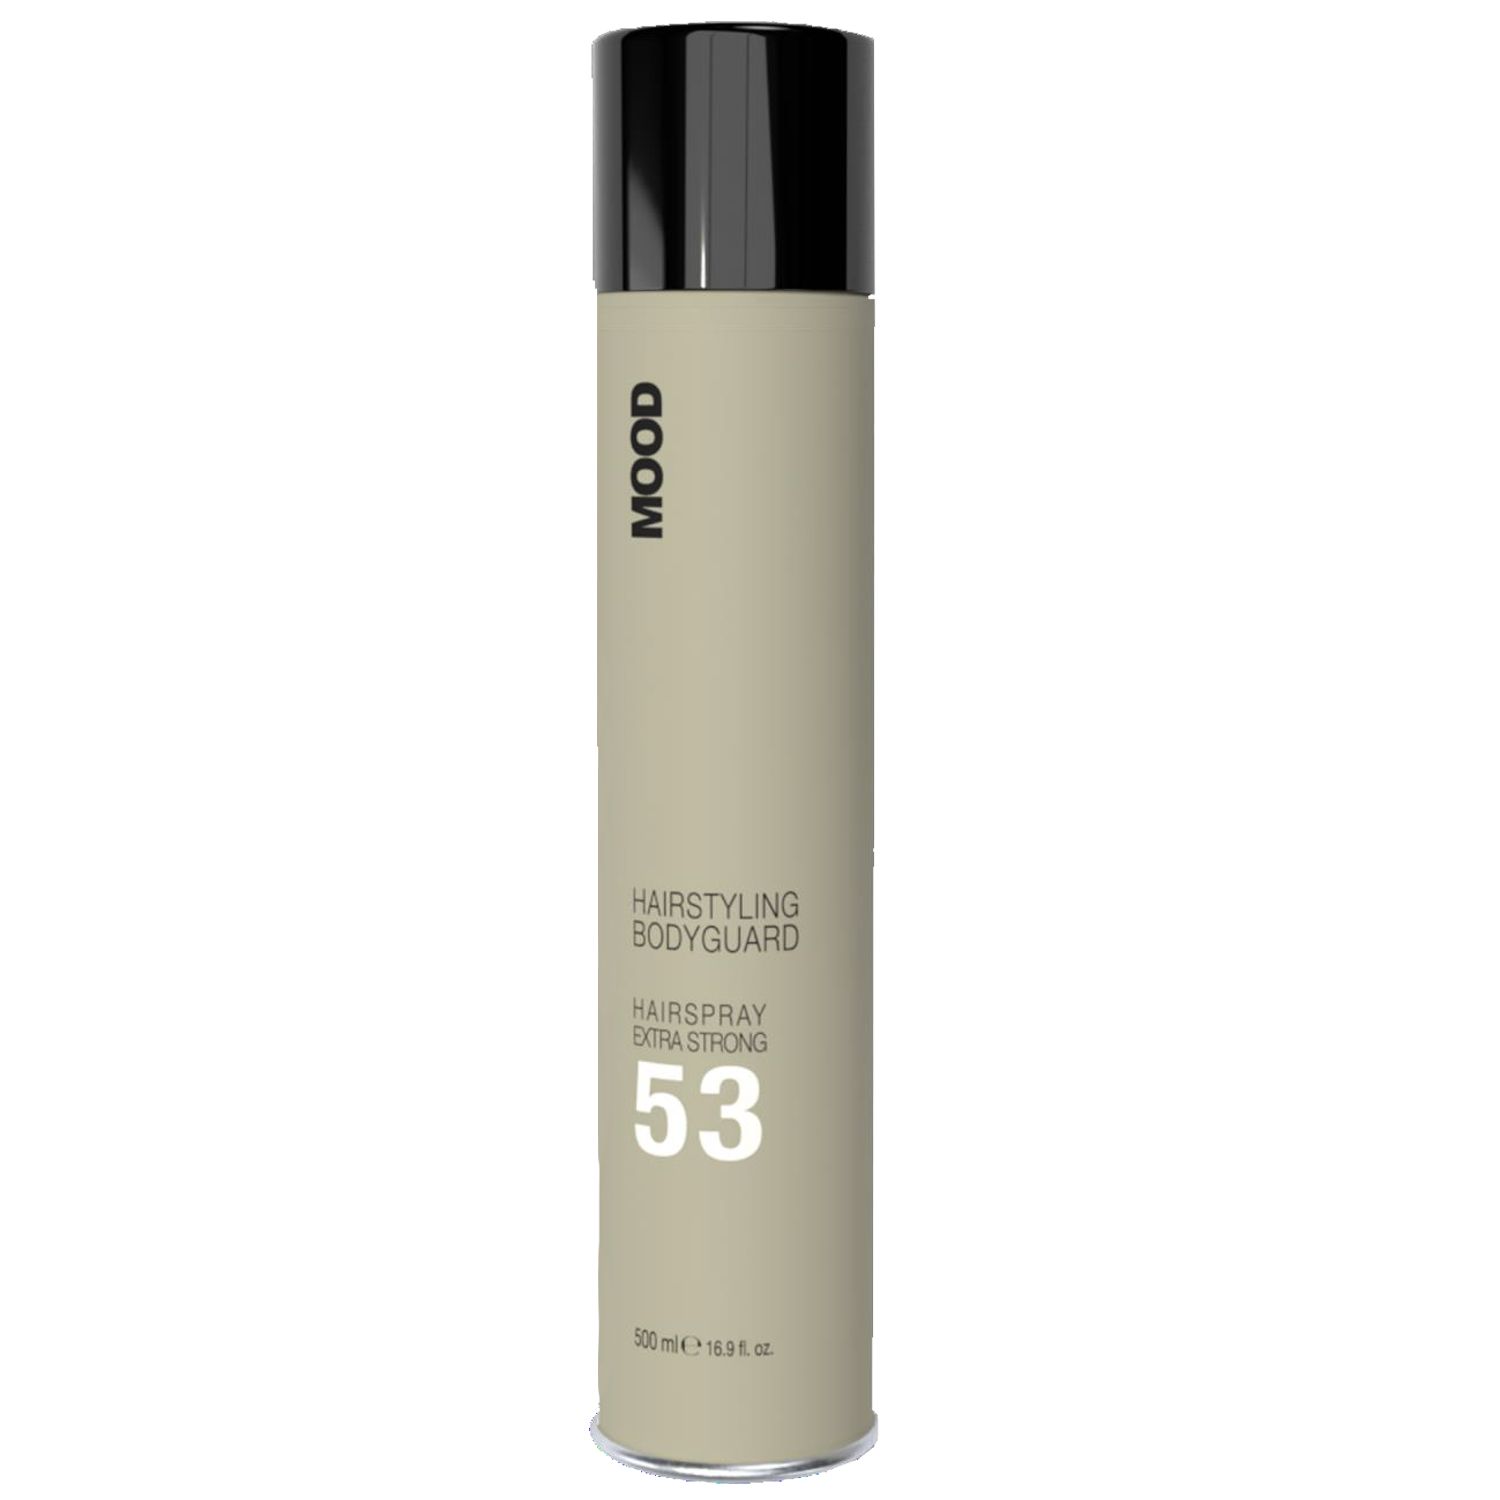 MOOD Hairstyling Bodyguard Hairspray Extra Strong 500 ml